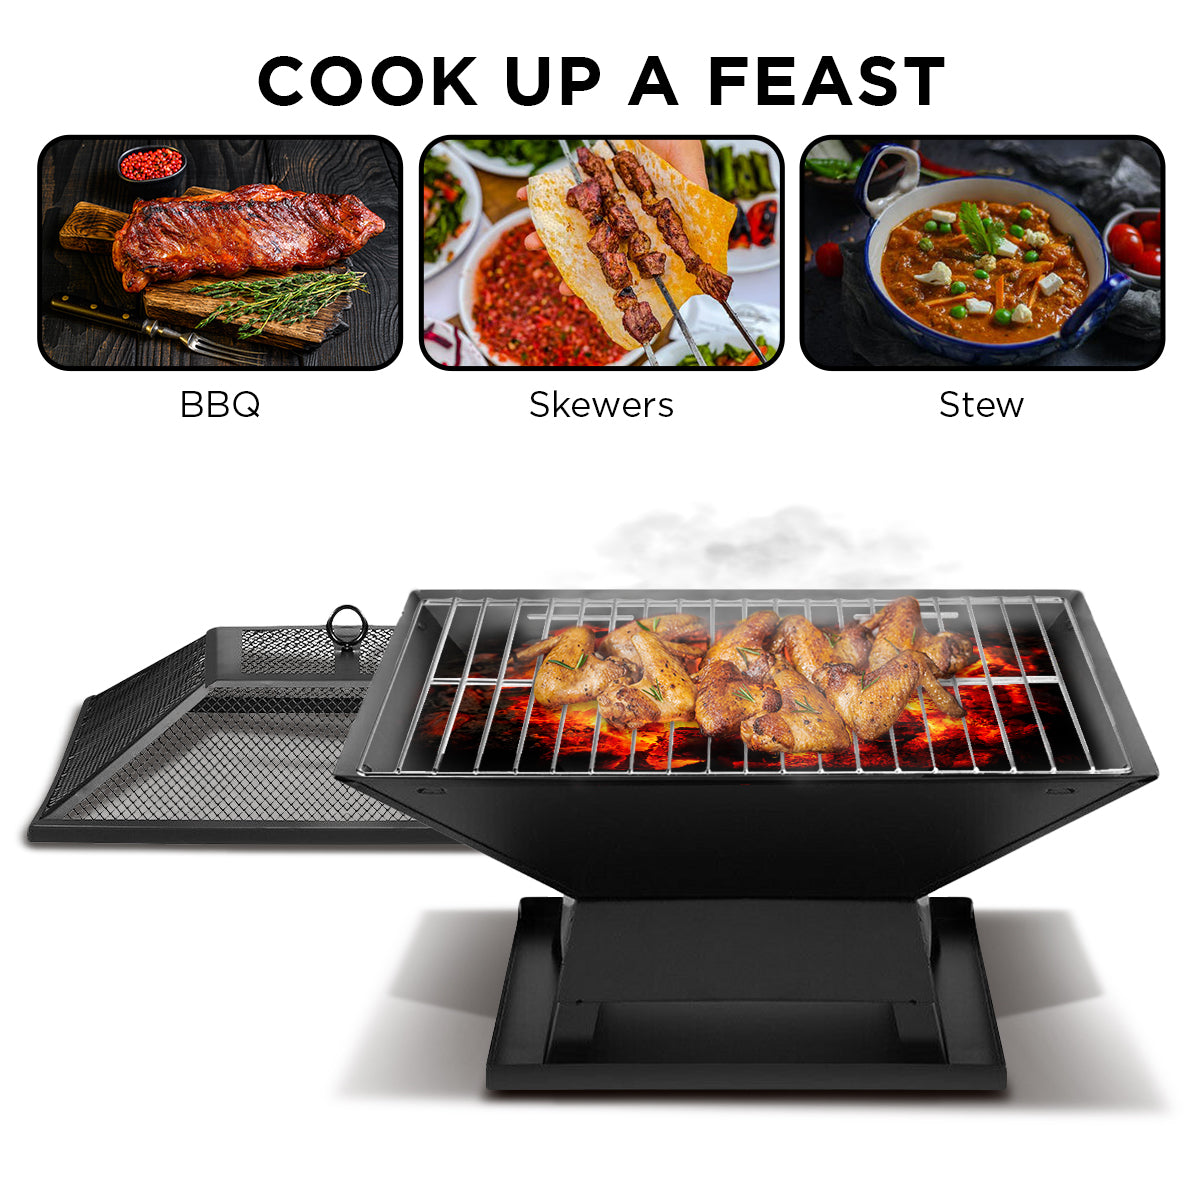 Fire Pit BBQ Portable Grill Cooking Camping Outdoor